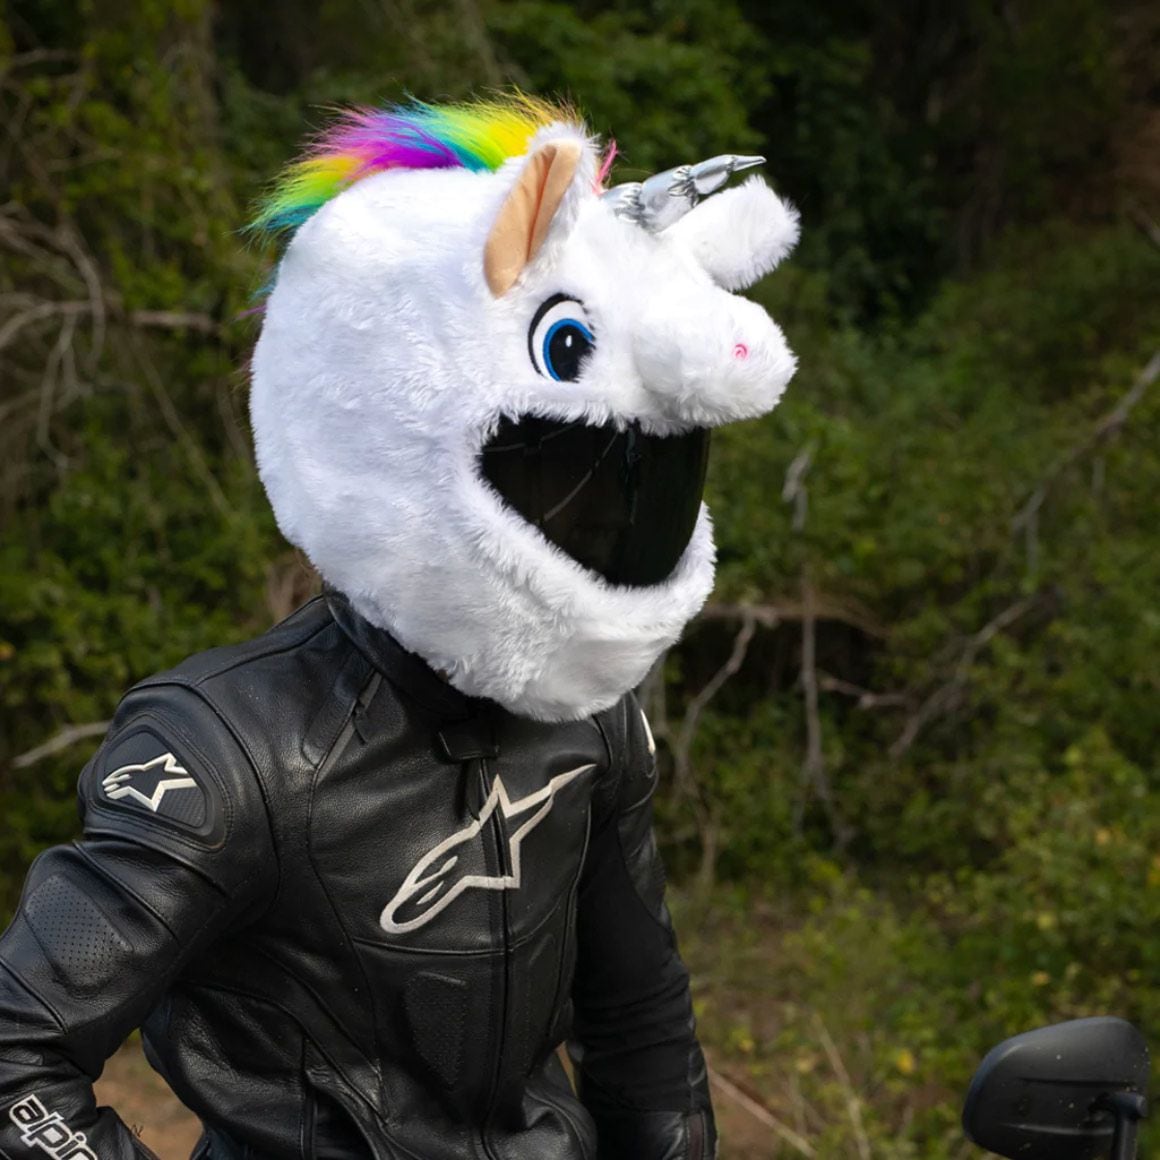 You may be a majestic unicorn. But without the right helmet cover, how will people know?